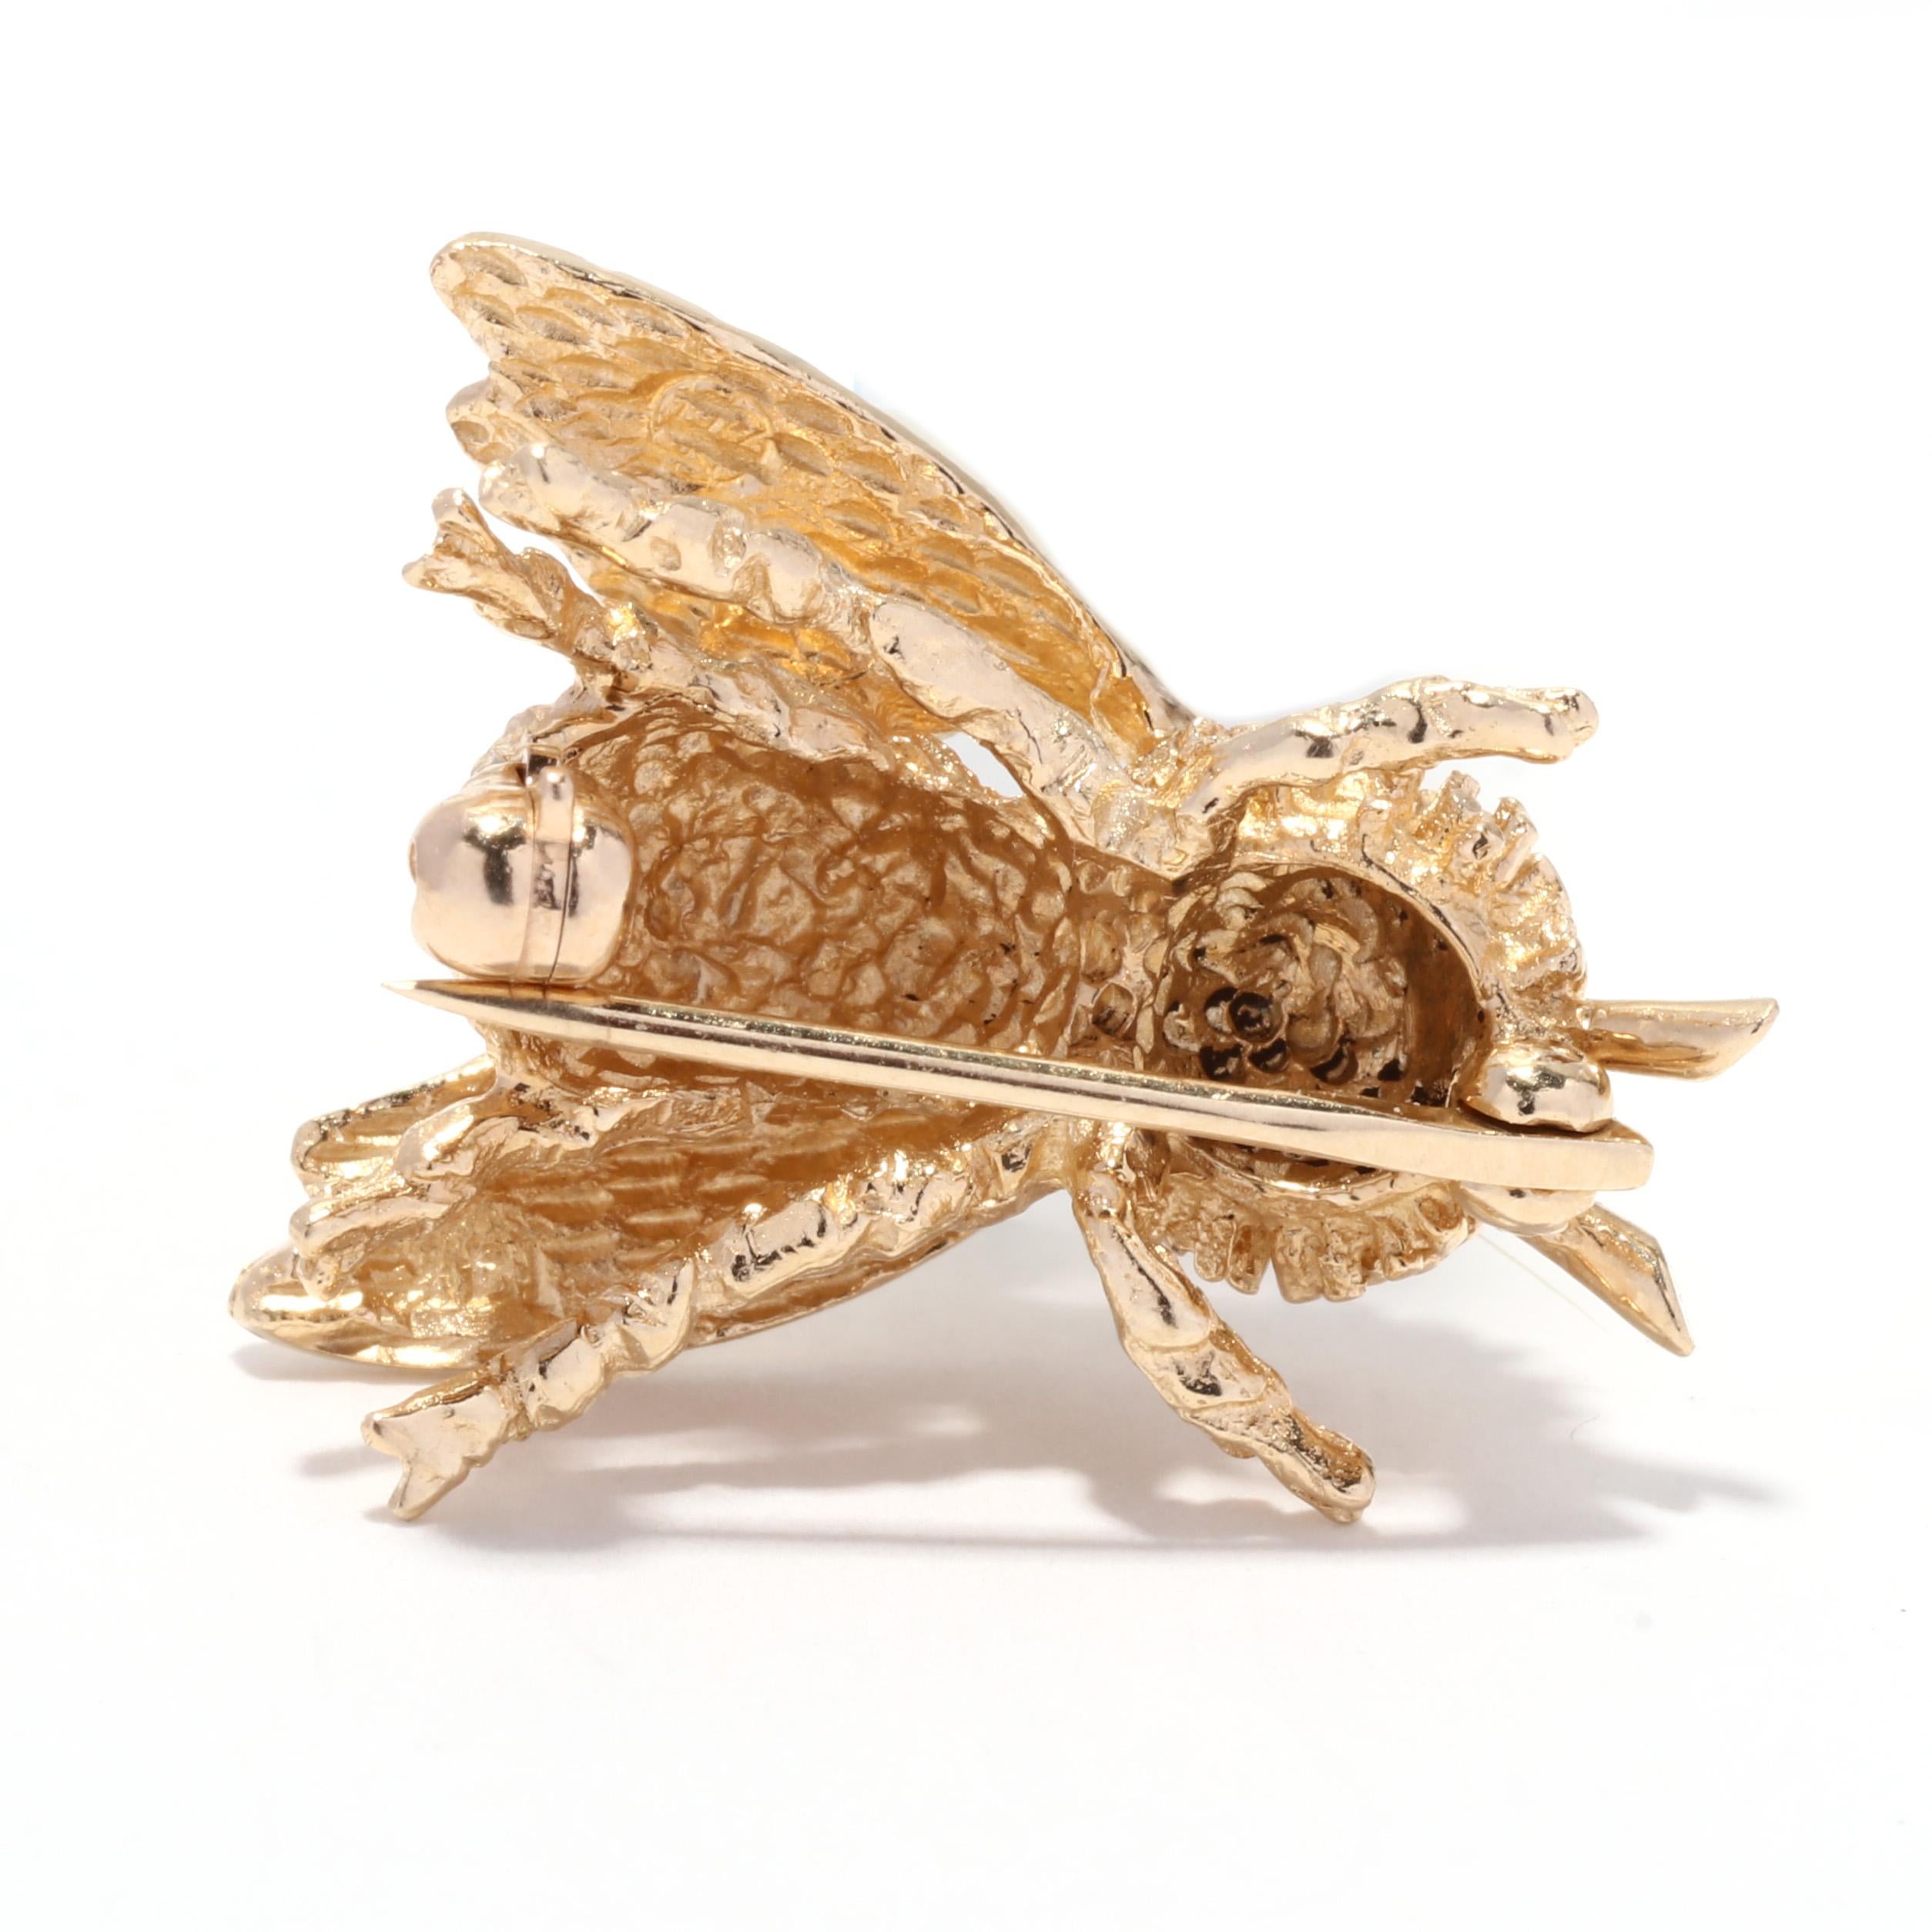 Add a touch of elegance and whimsy to your outfit with this Gold Bumble Bee Brooch. Made with 14KT yellow gold, this brooch features a simple yet detailed bee design. The brooch measures approximately 3/4 inch in length, making it the perfect size